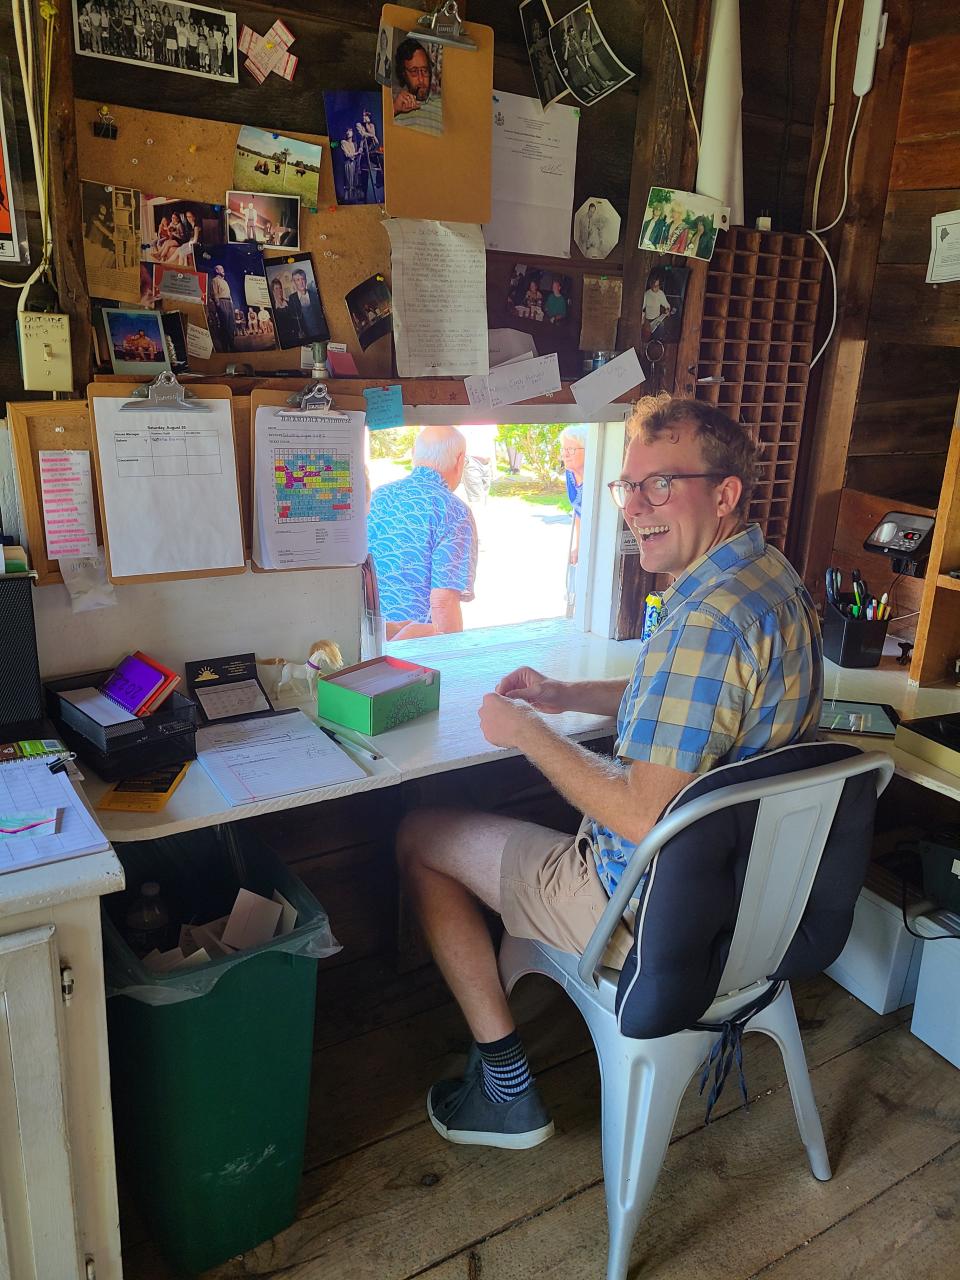 Aram Guptill sits at the Hackmatack Playhouse box office, where he has been a familiar face in recent years. Aram and his brother Conor will be re-opening Hackmatack Playhouse, where they hope to expand on activities for children and to integrate the farm into their community space.